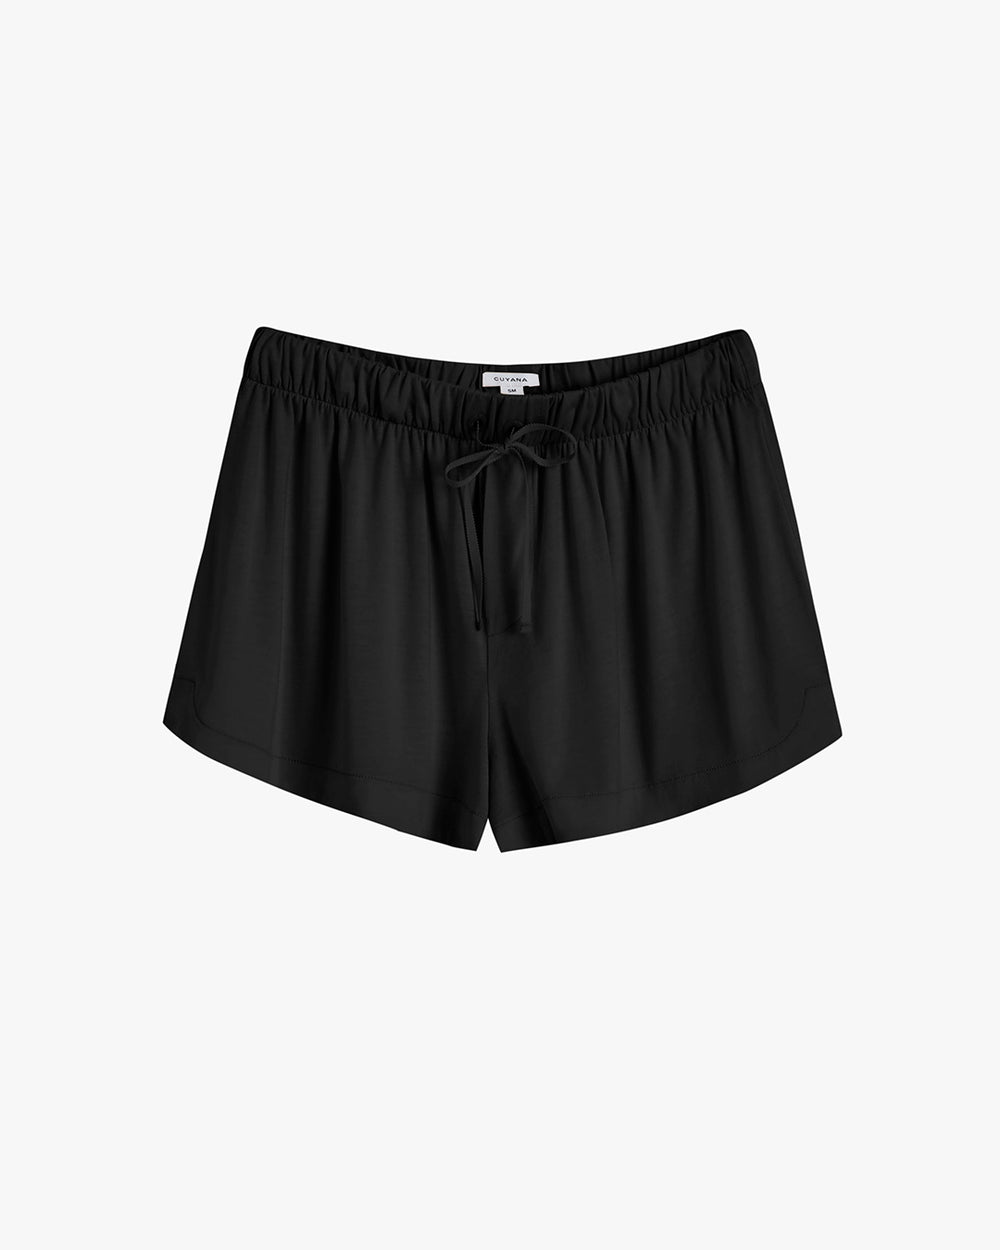 Shorts with an elastic waistband and drawstring tie.